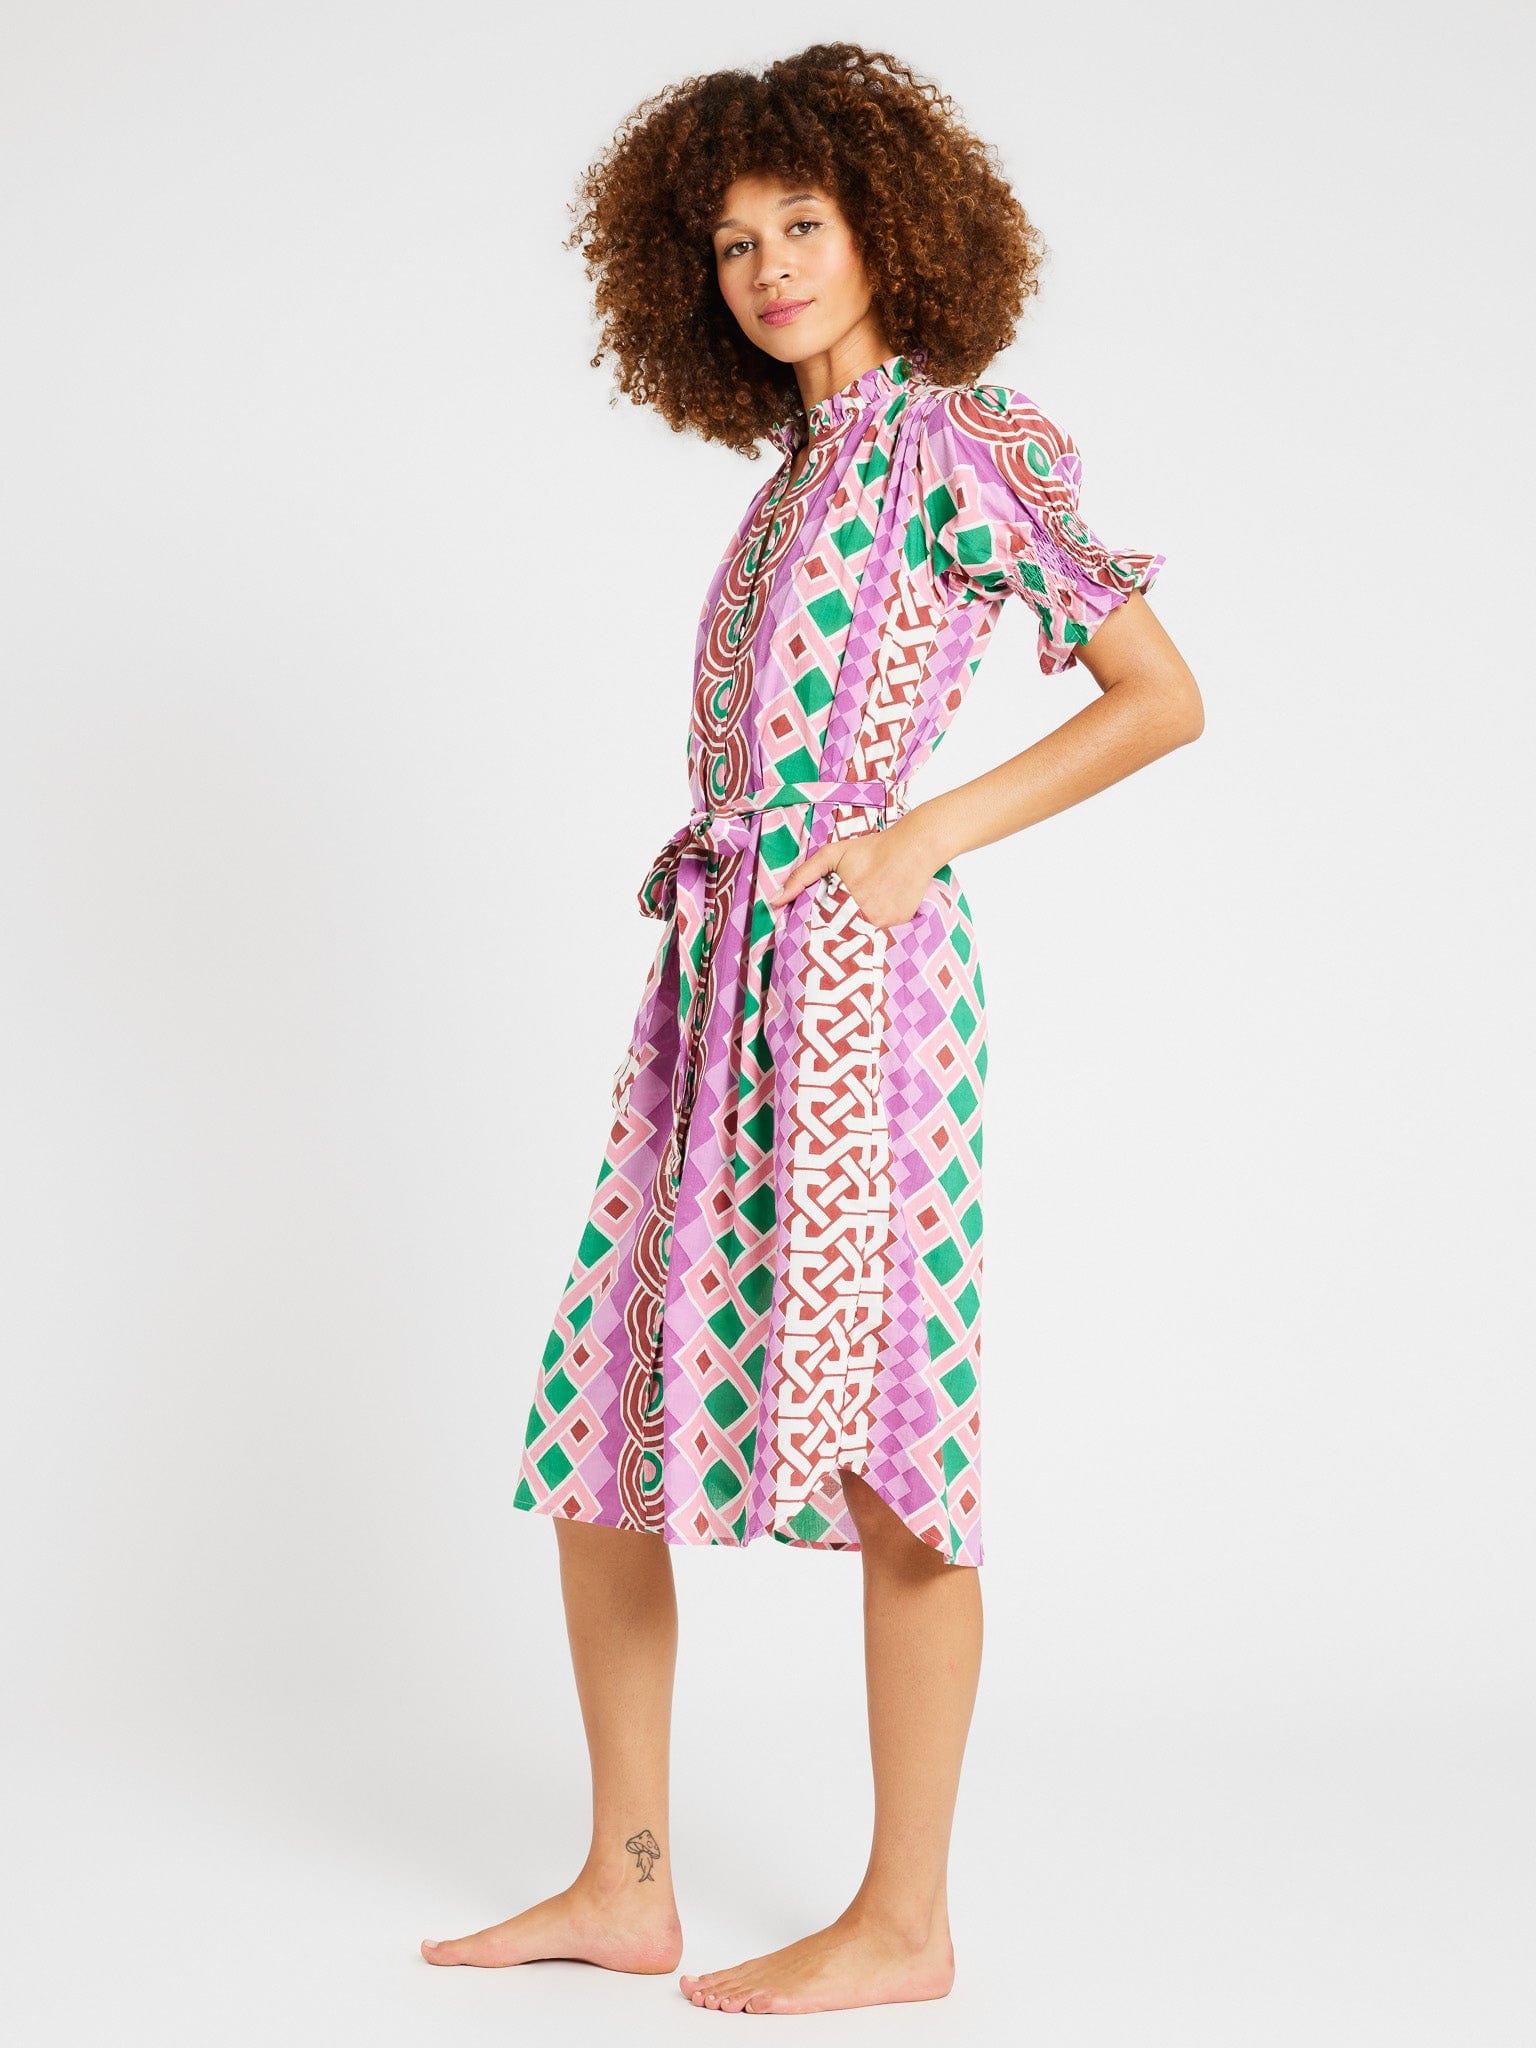 MILLE Clothing Vera Dress in Casa